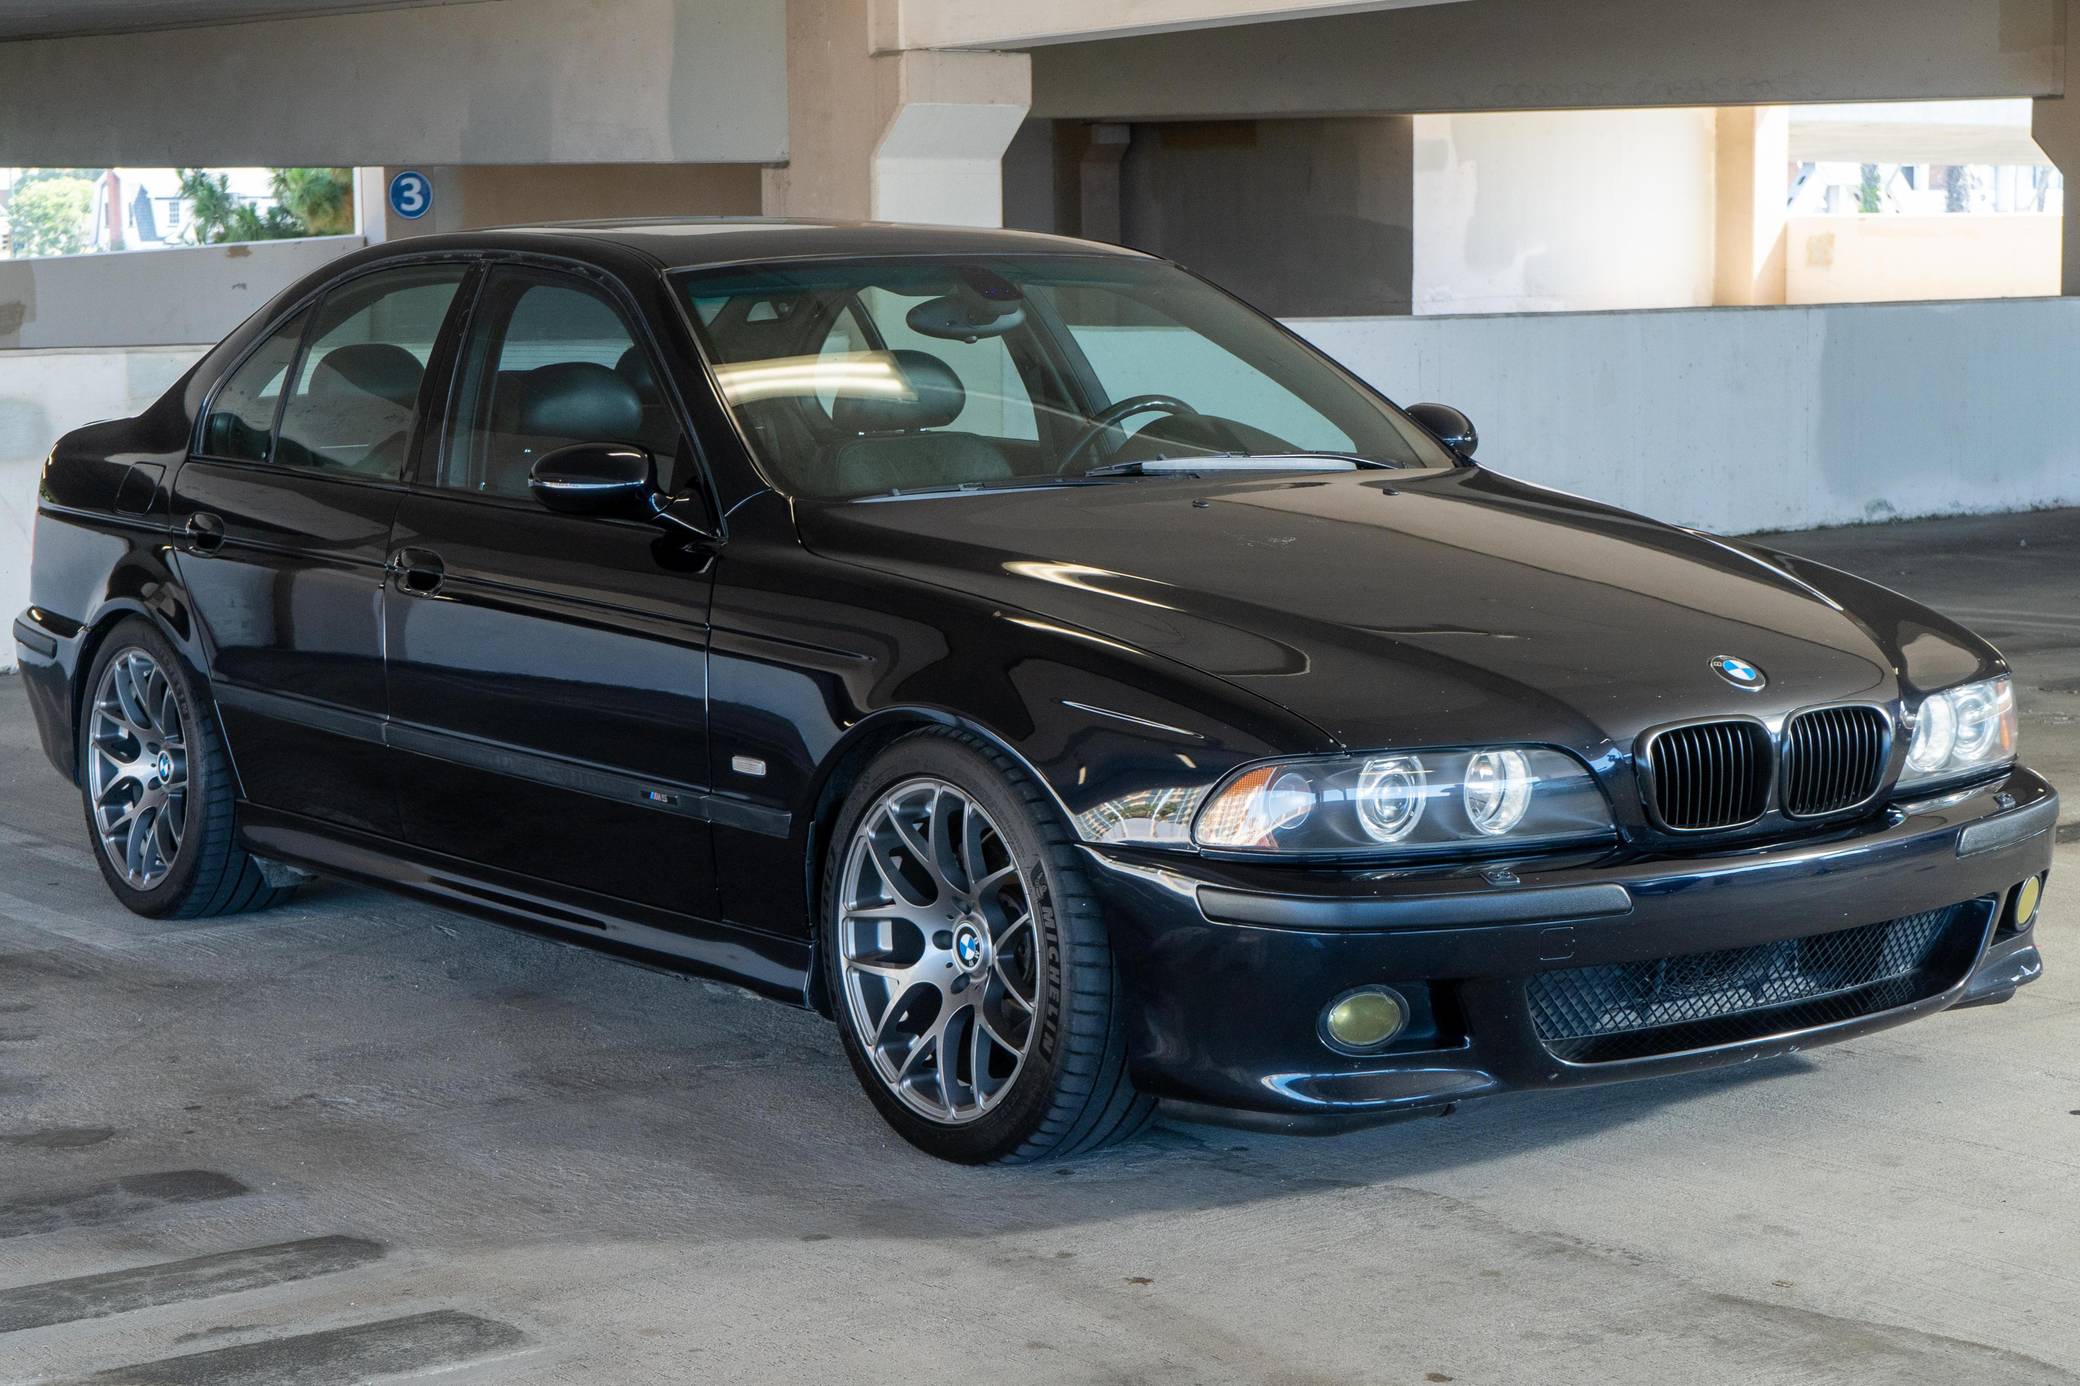 BMW Issues Do Not Drive Order for E39 M5, 90,000 Other Cars